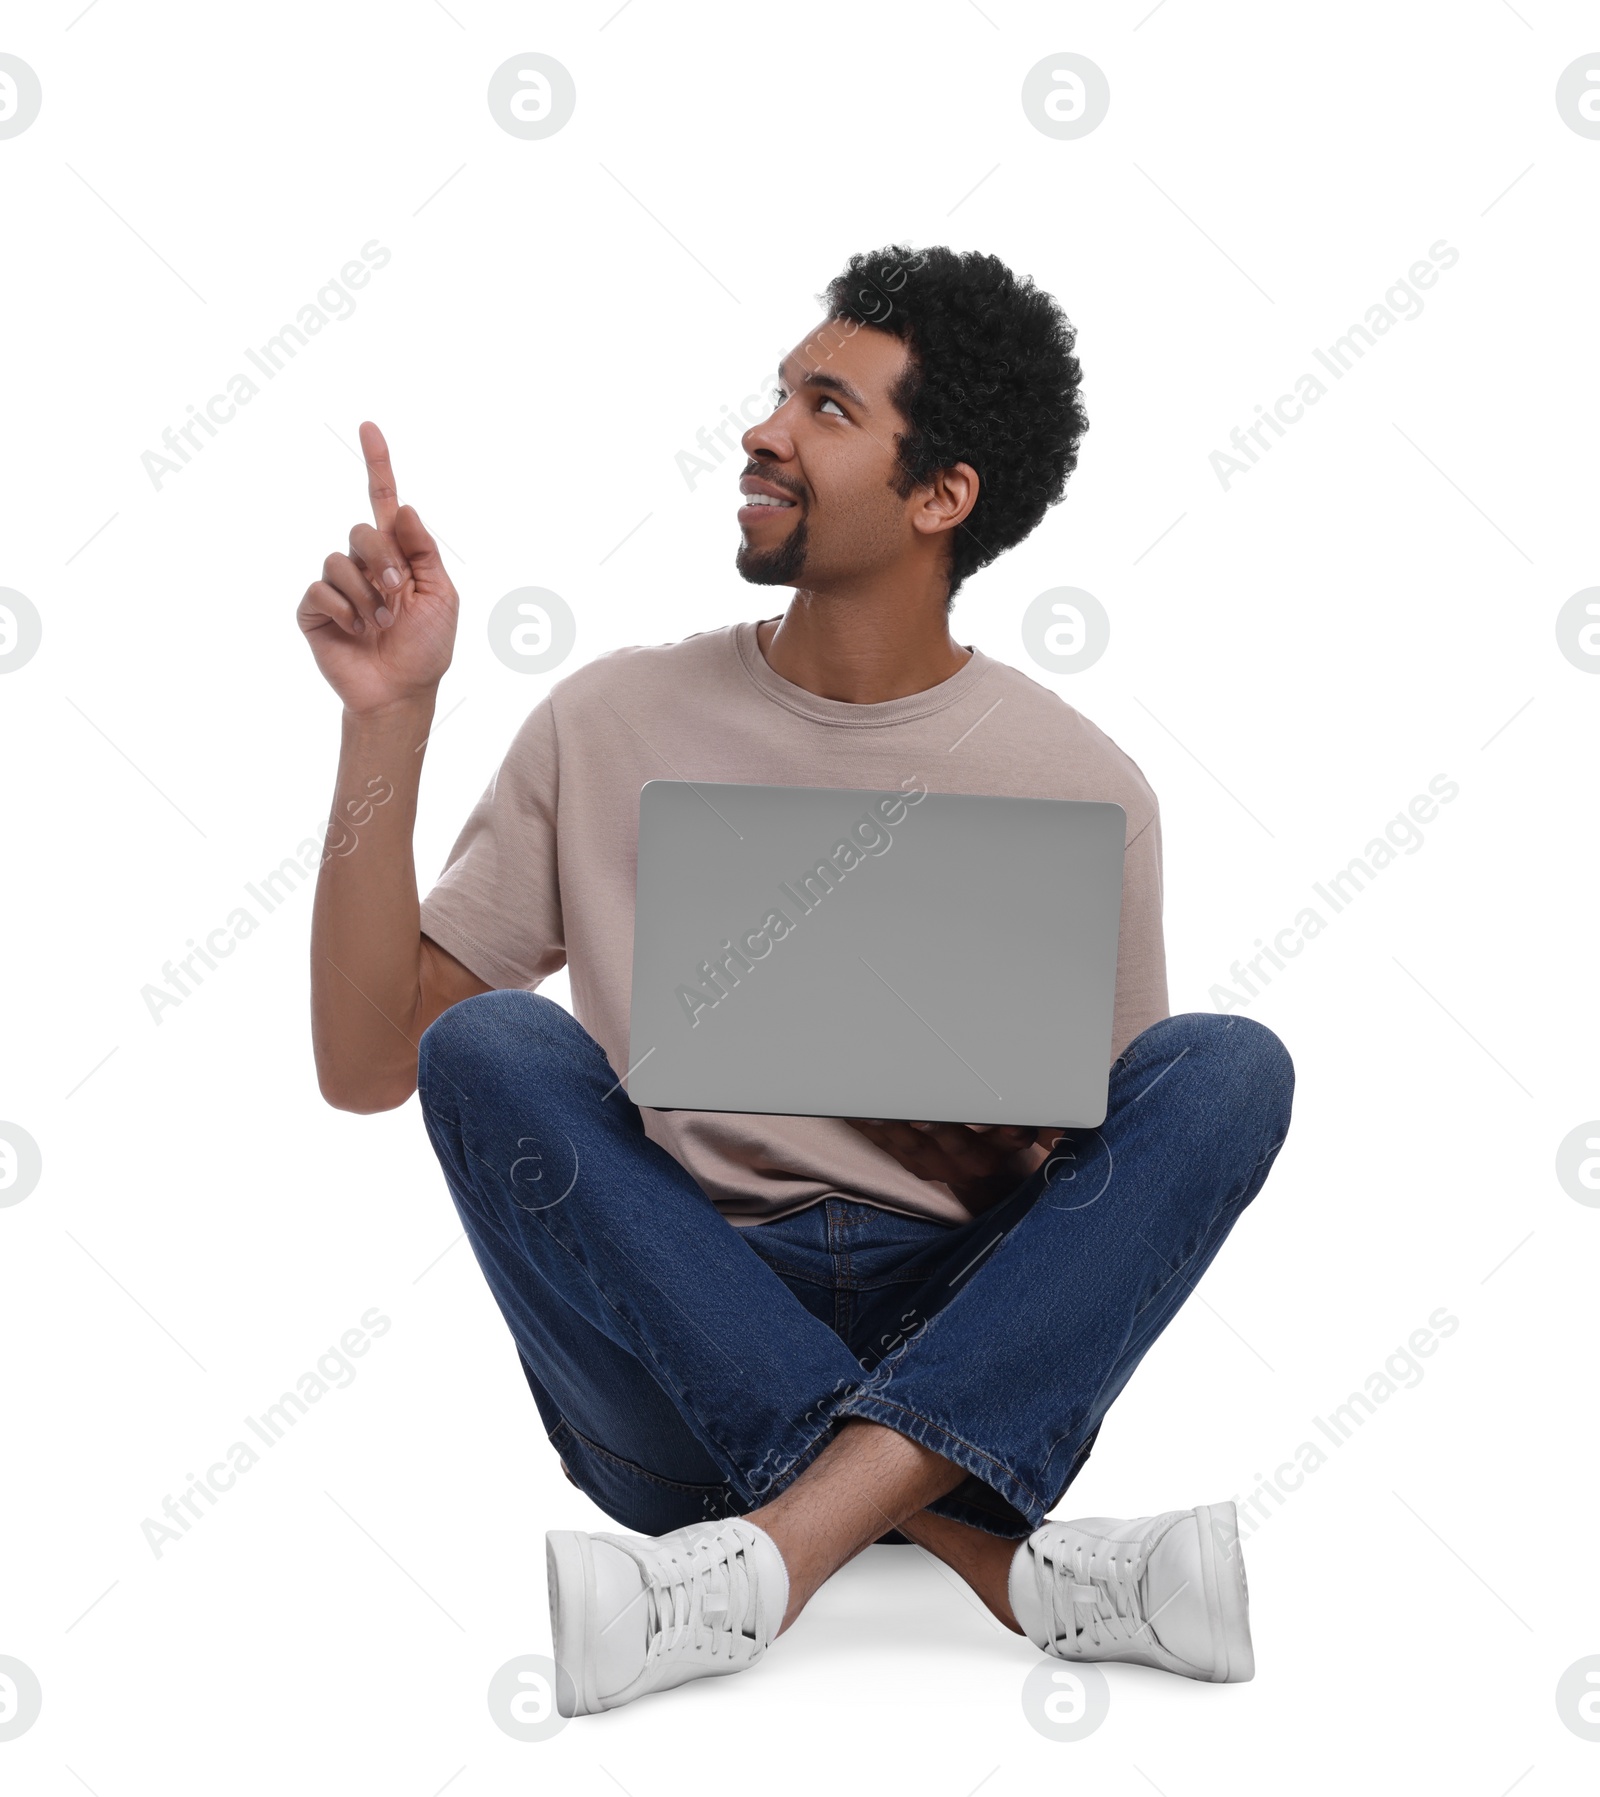 Photo of Smiling man with laptop pointing at something on white background